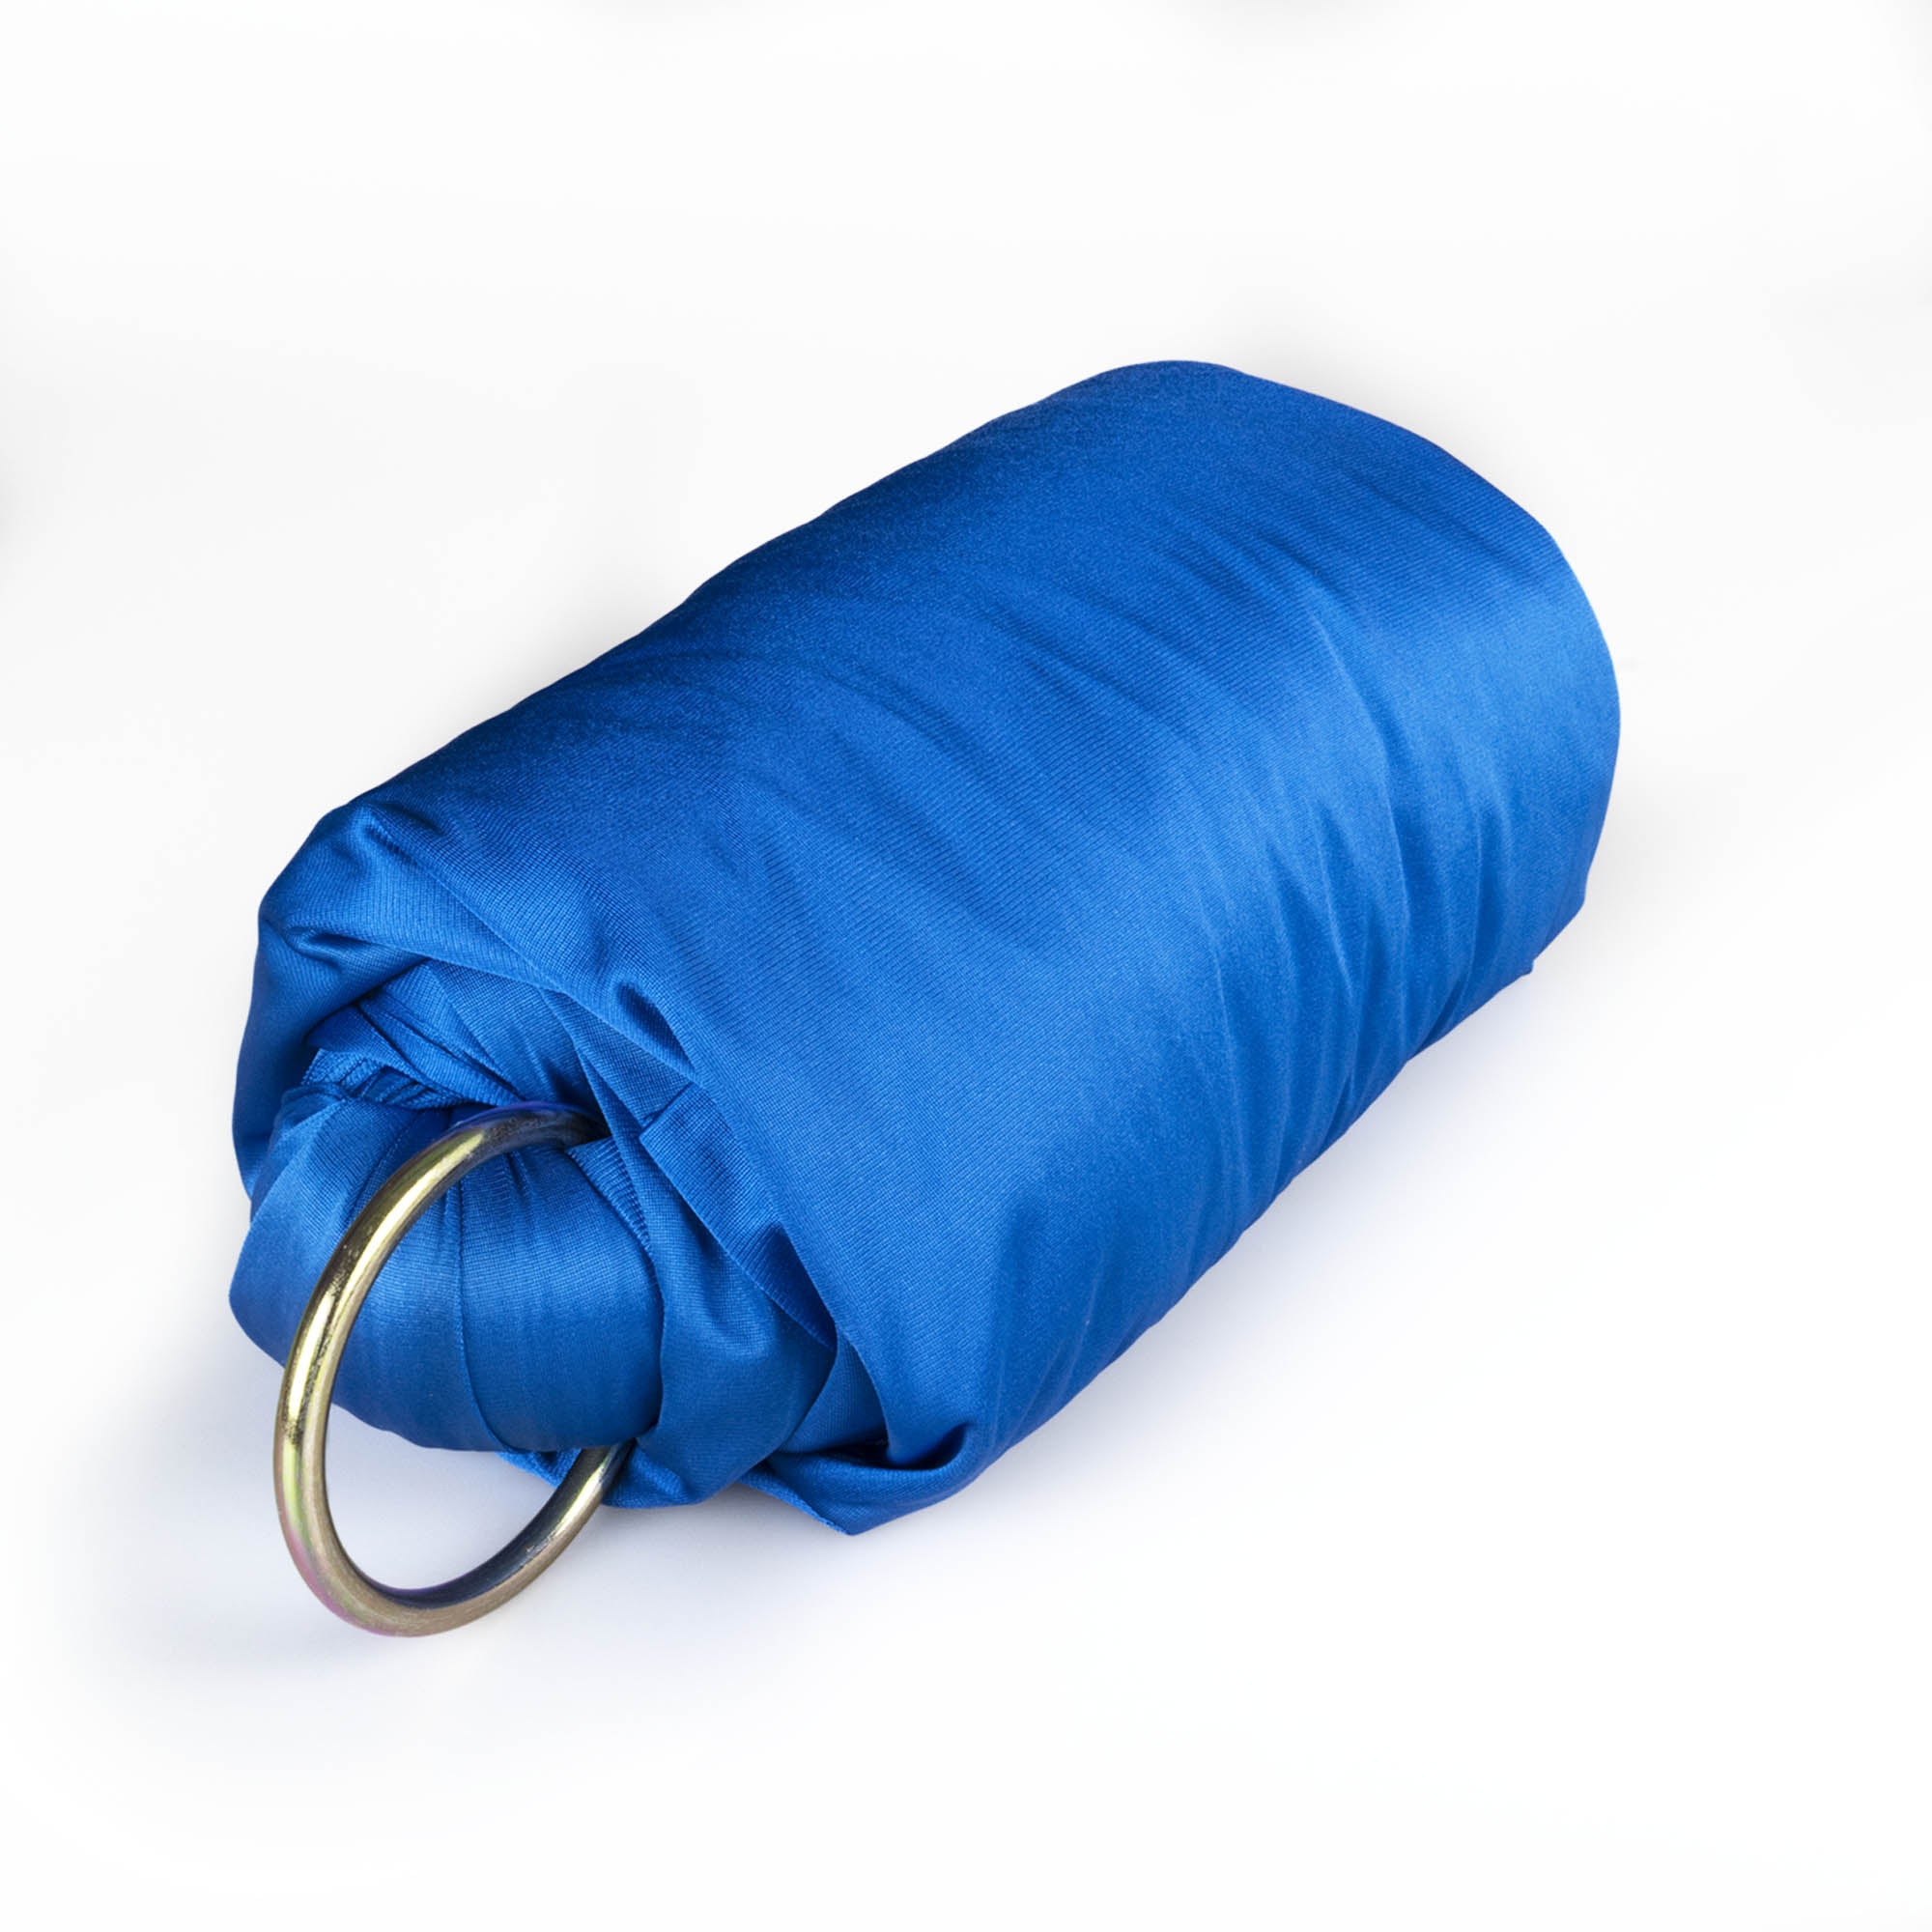 Royal blue yoga hammock rolled up with ring attached